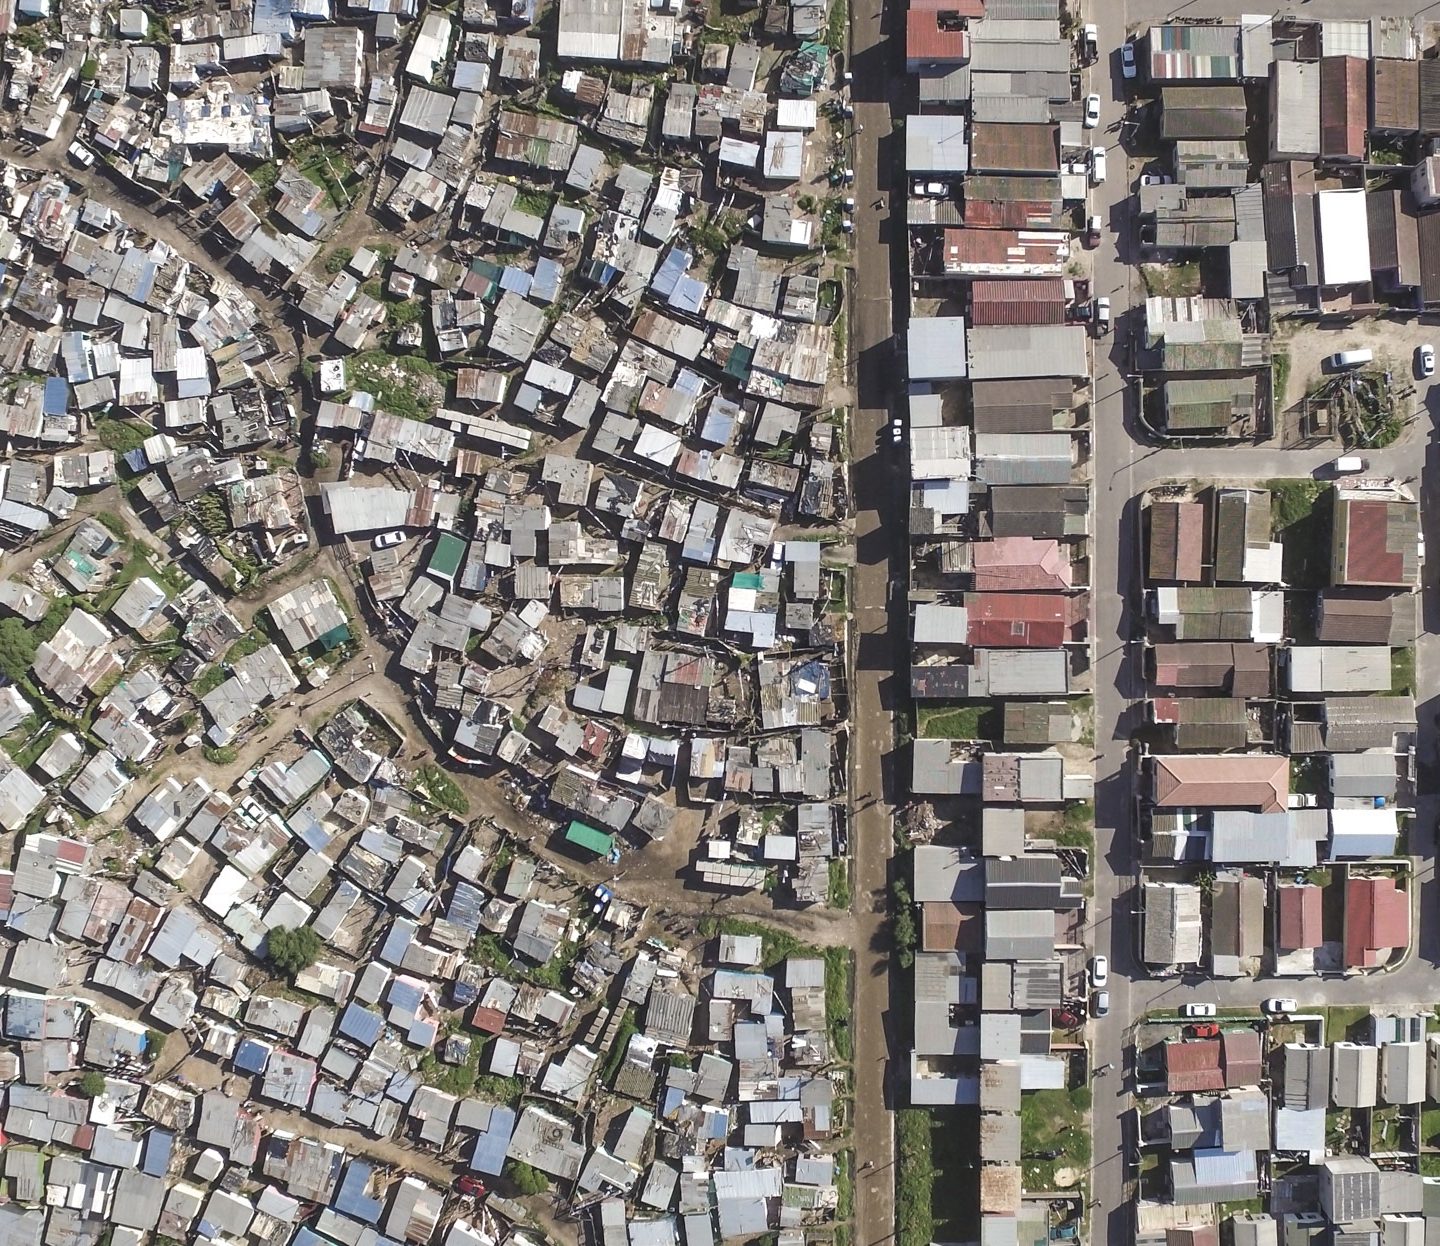 Quantifying residential segregation in South Africa’s largest cities